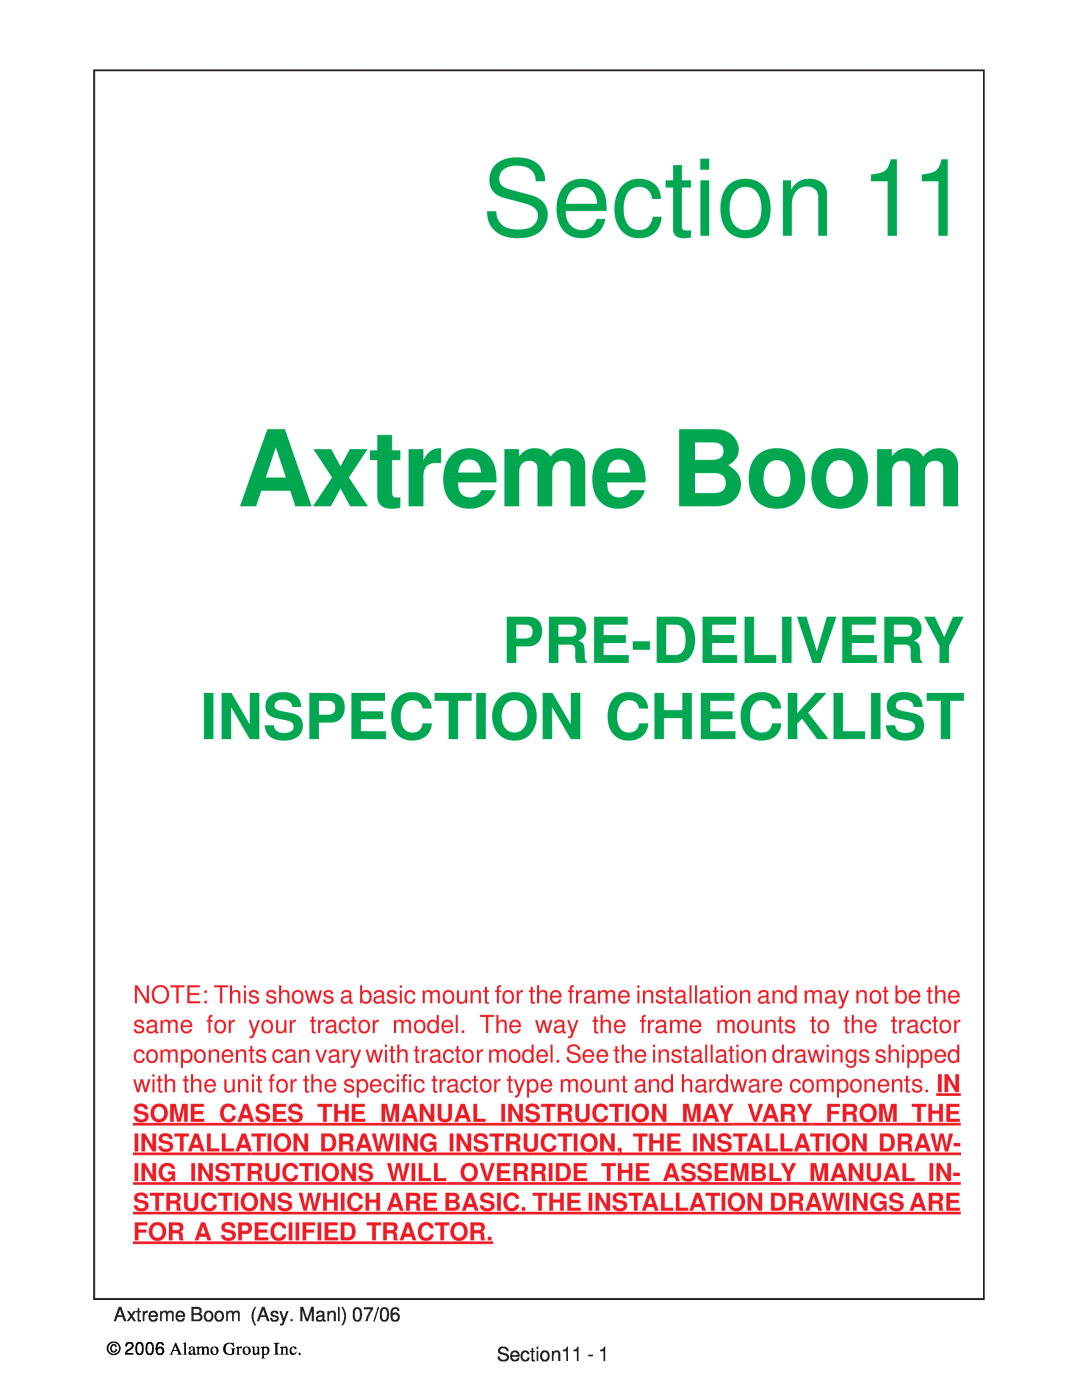 Alamo 02984405 instruction manual Section, Pre-Delivery Inspection Checklist, Axtreme Boom Asy. Manl 07/06 